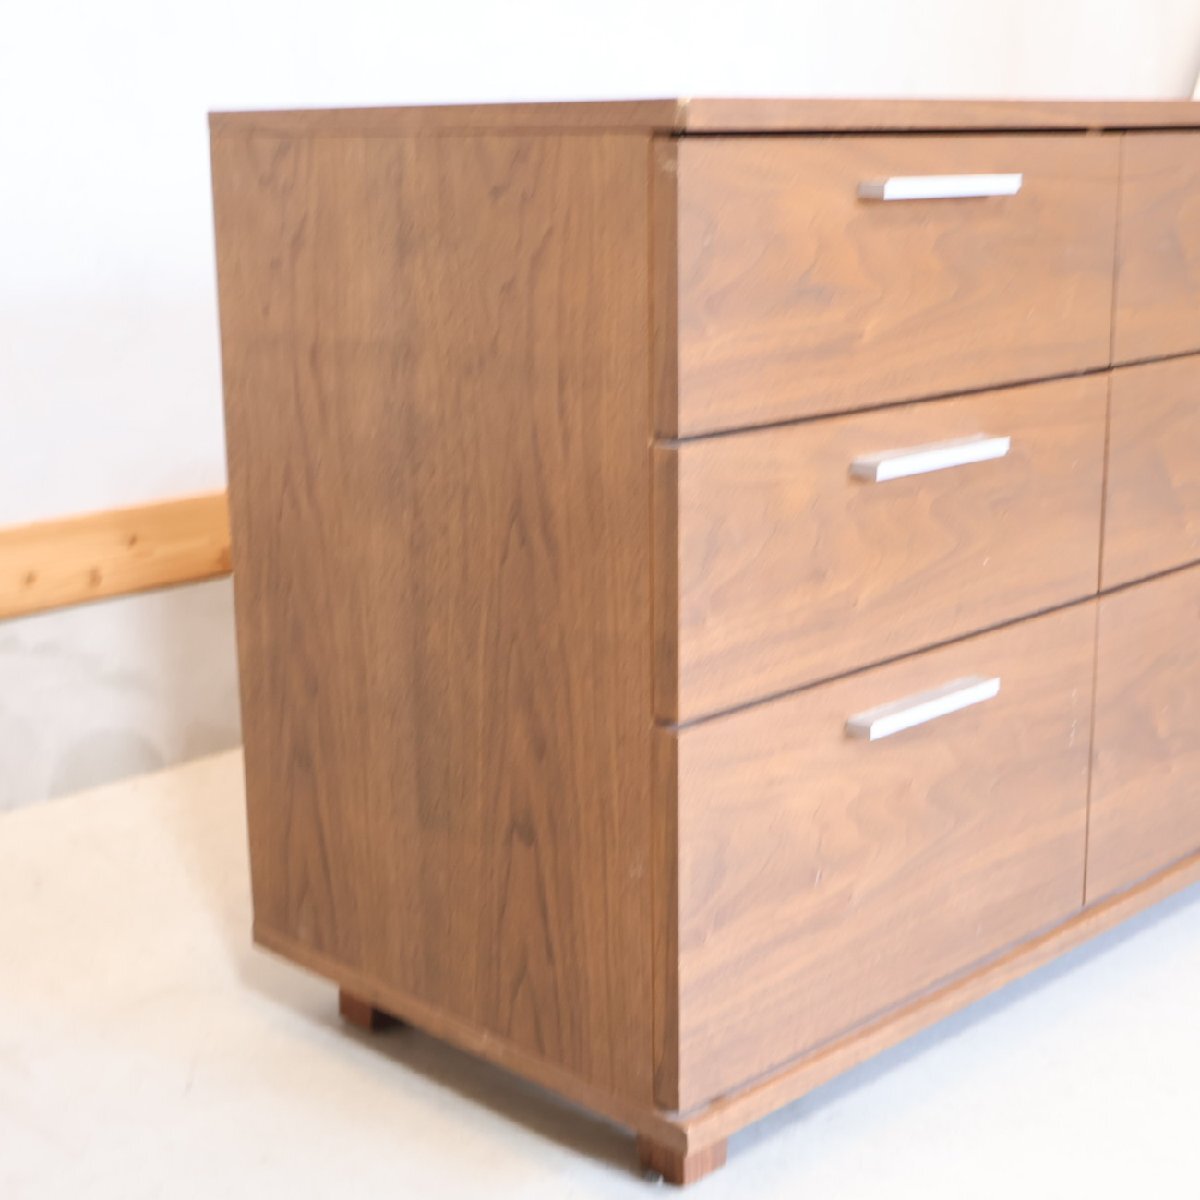 ACTUS actus FB walnut material 3 step chest Northern Europe style natural modern simple chest do lower chest of drawers drawer ED436